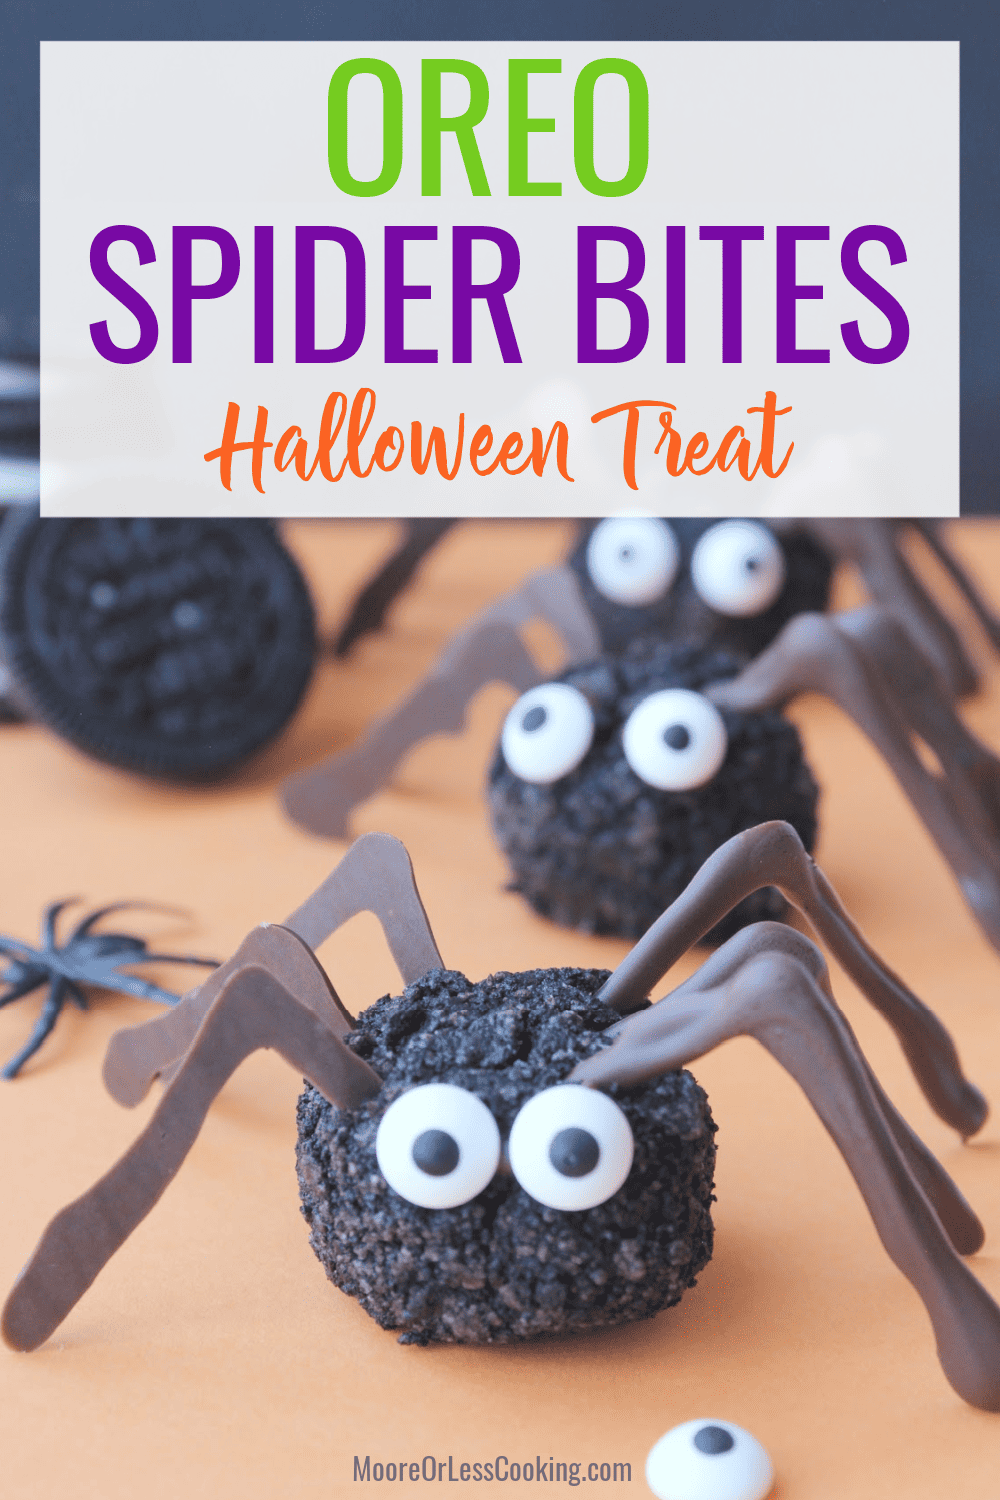 These Oreo Spider Bites are the perfect no-bake edible craft to make for Halloween. They're adorable, delicious and easy enough that even the kids can help make them! via @Mooreorlesscook